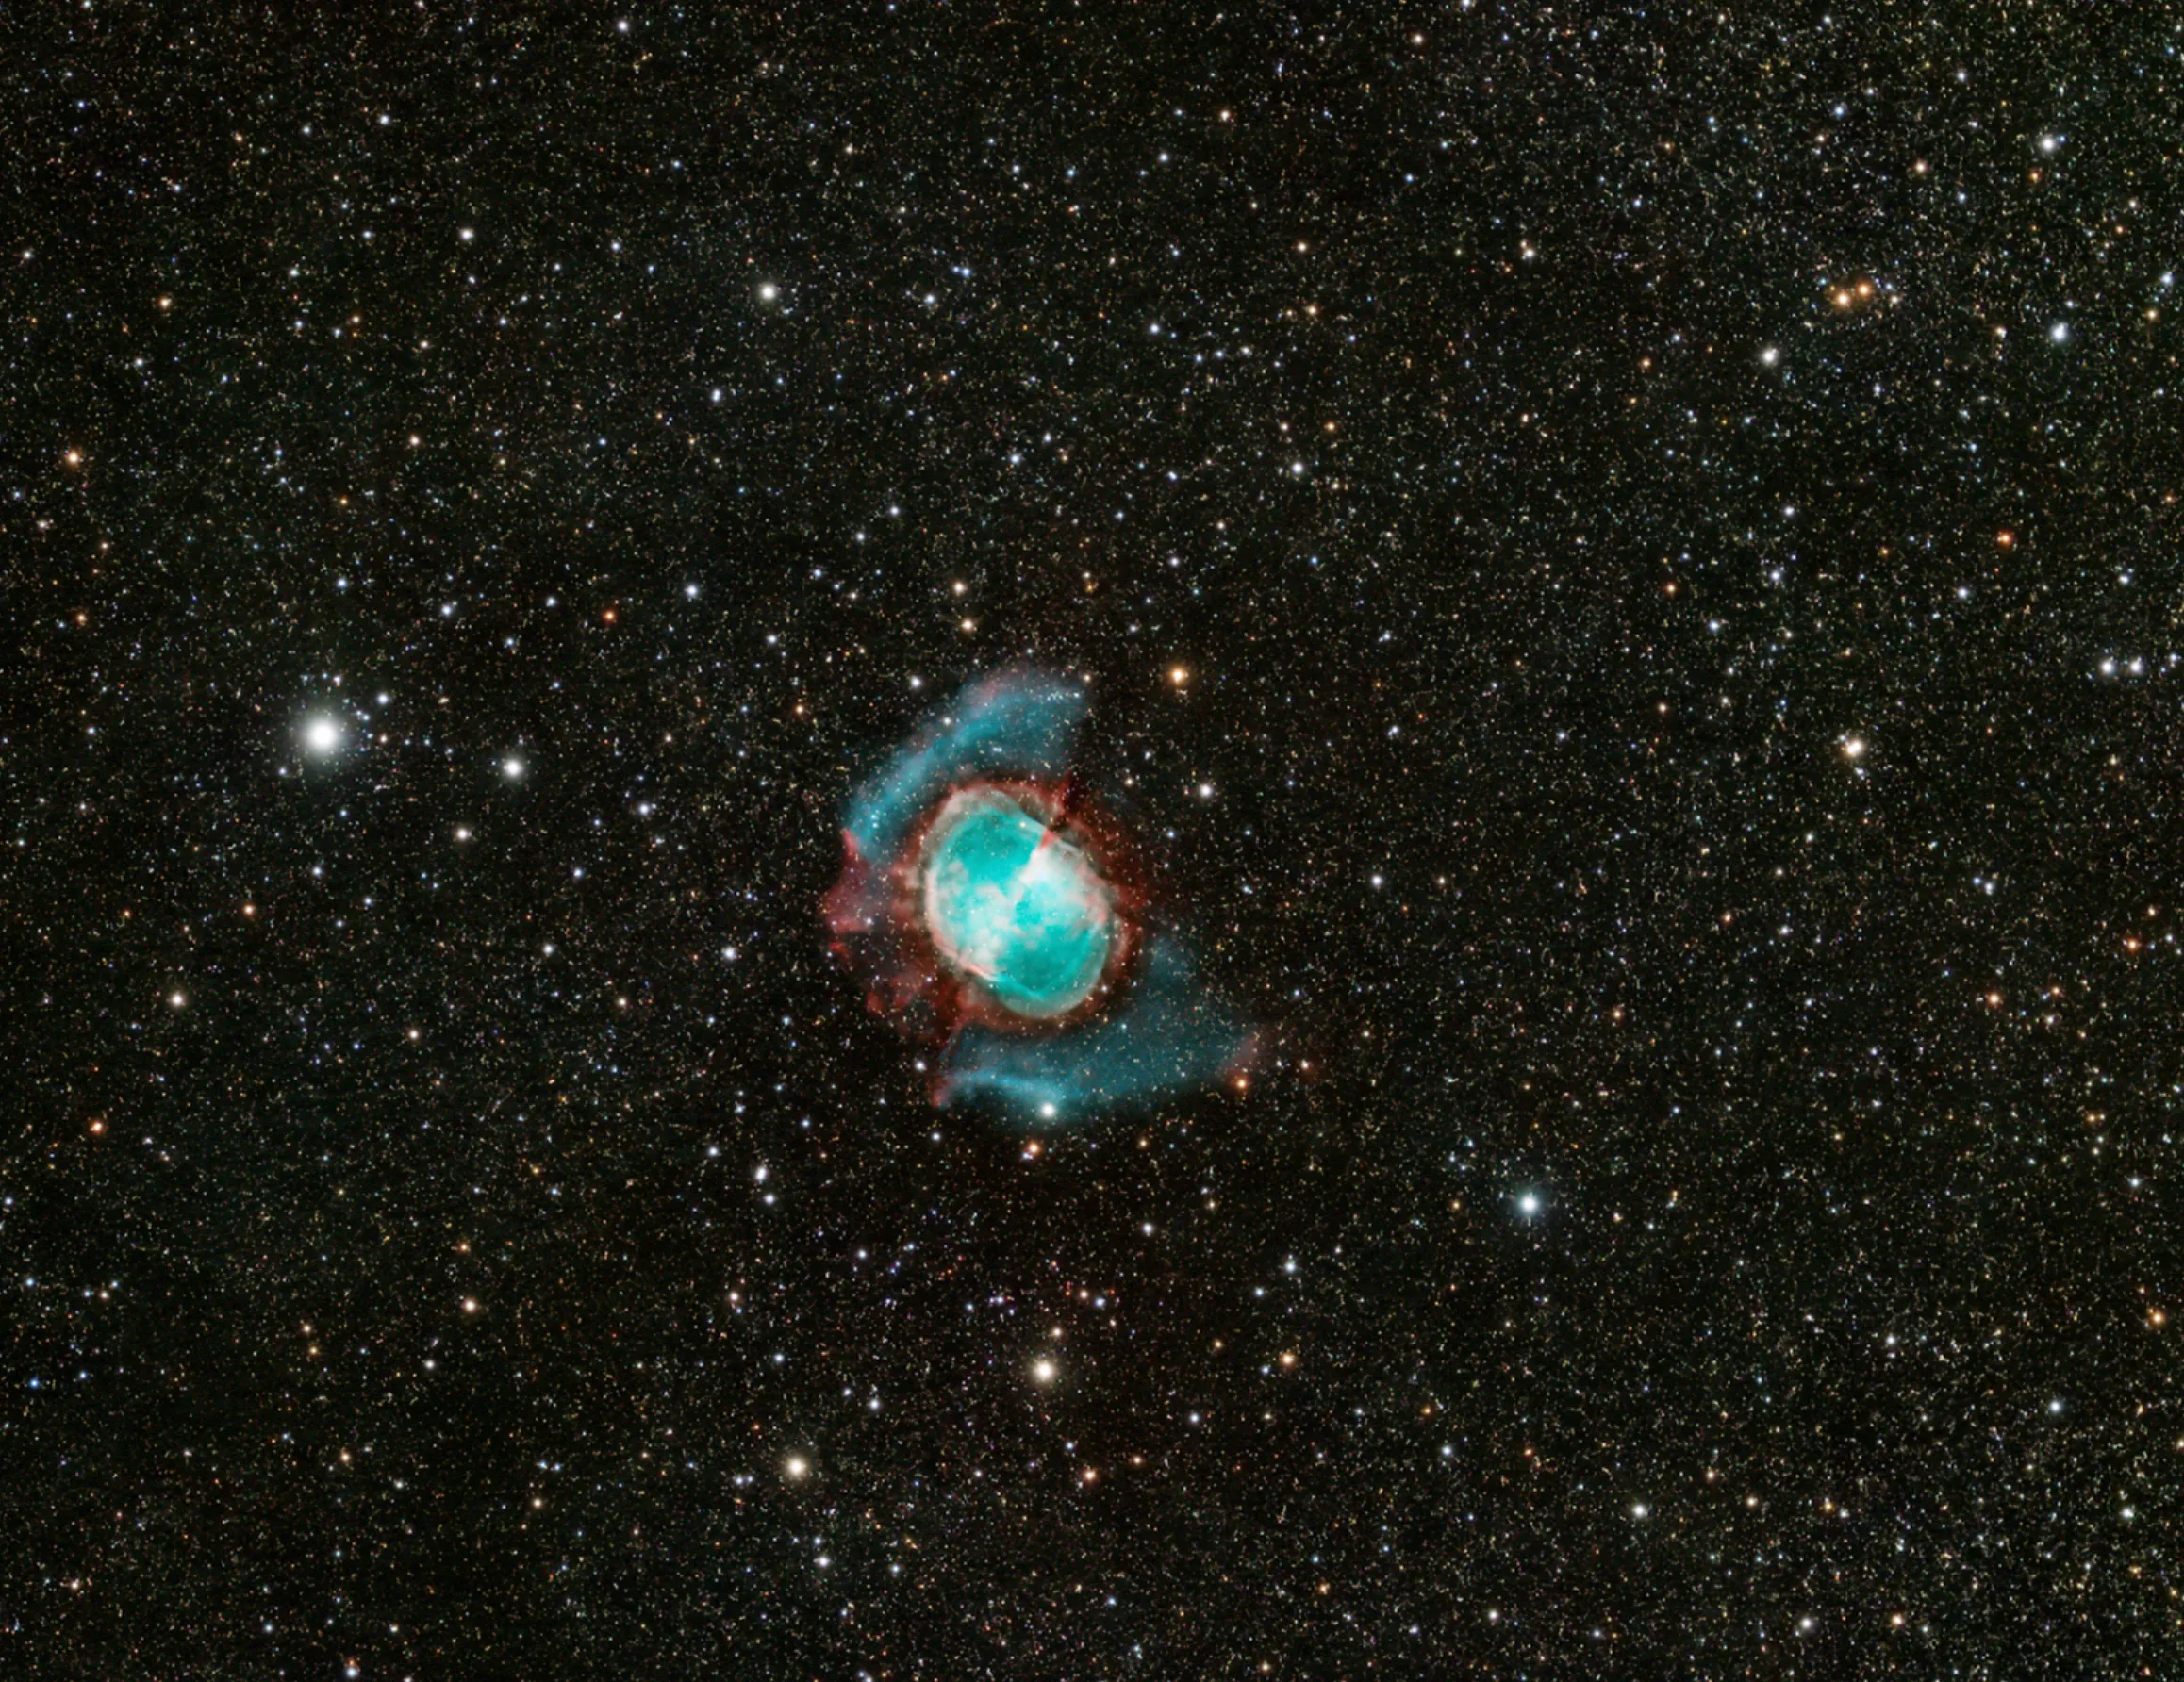 M27 Dumbbell Nebula astrophoto taken with the FSQ 106 EDX4 by Richard Harris